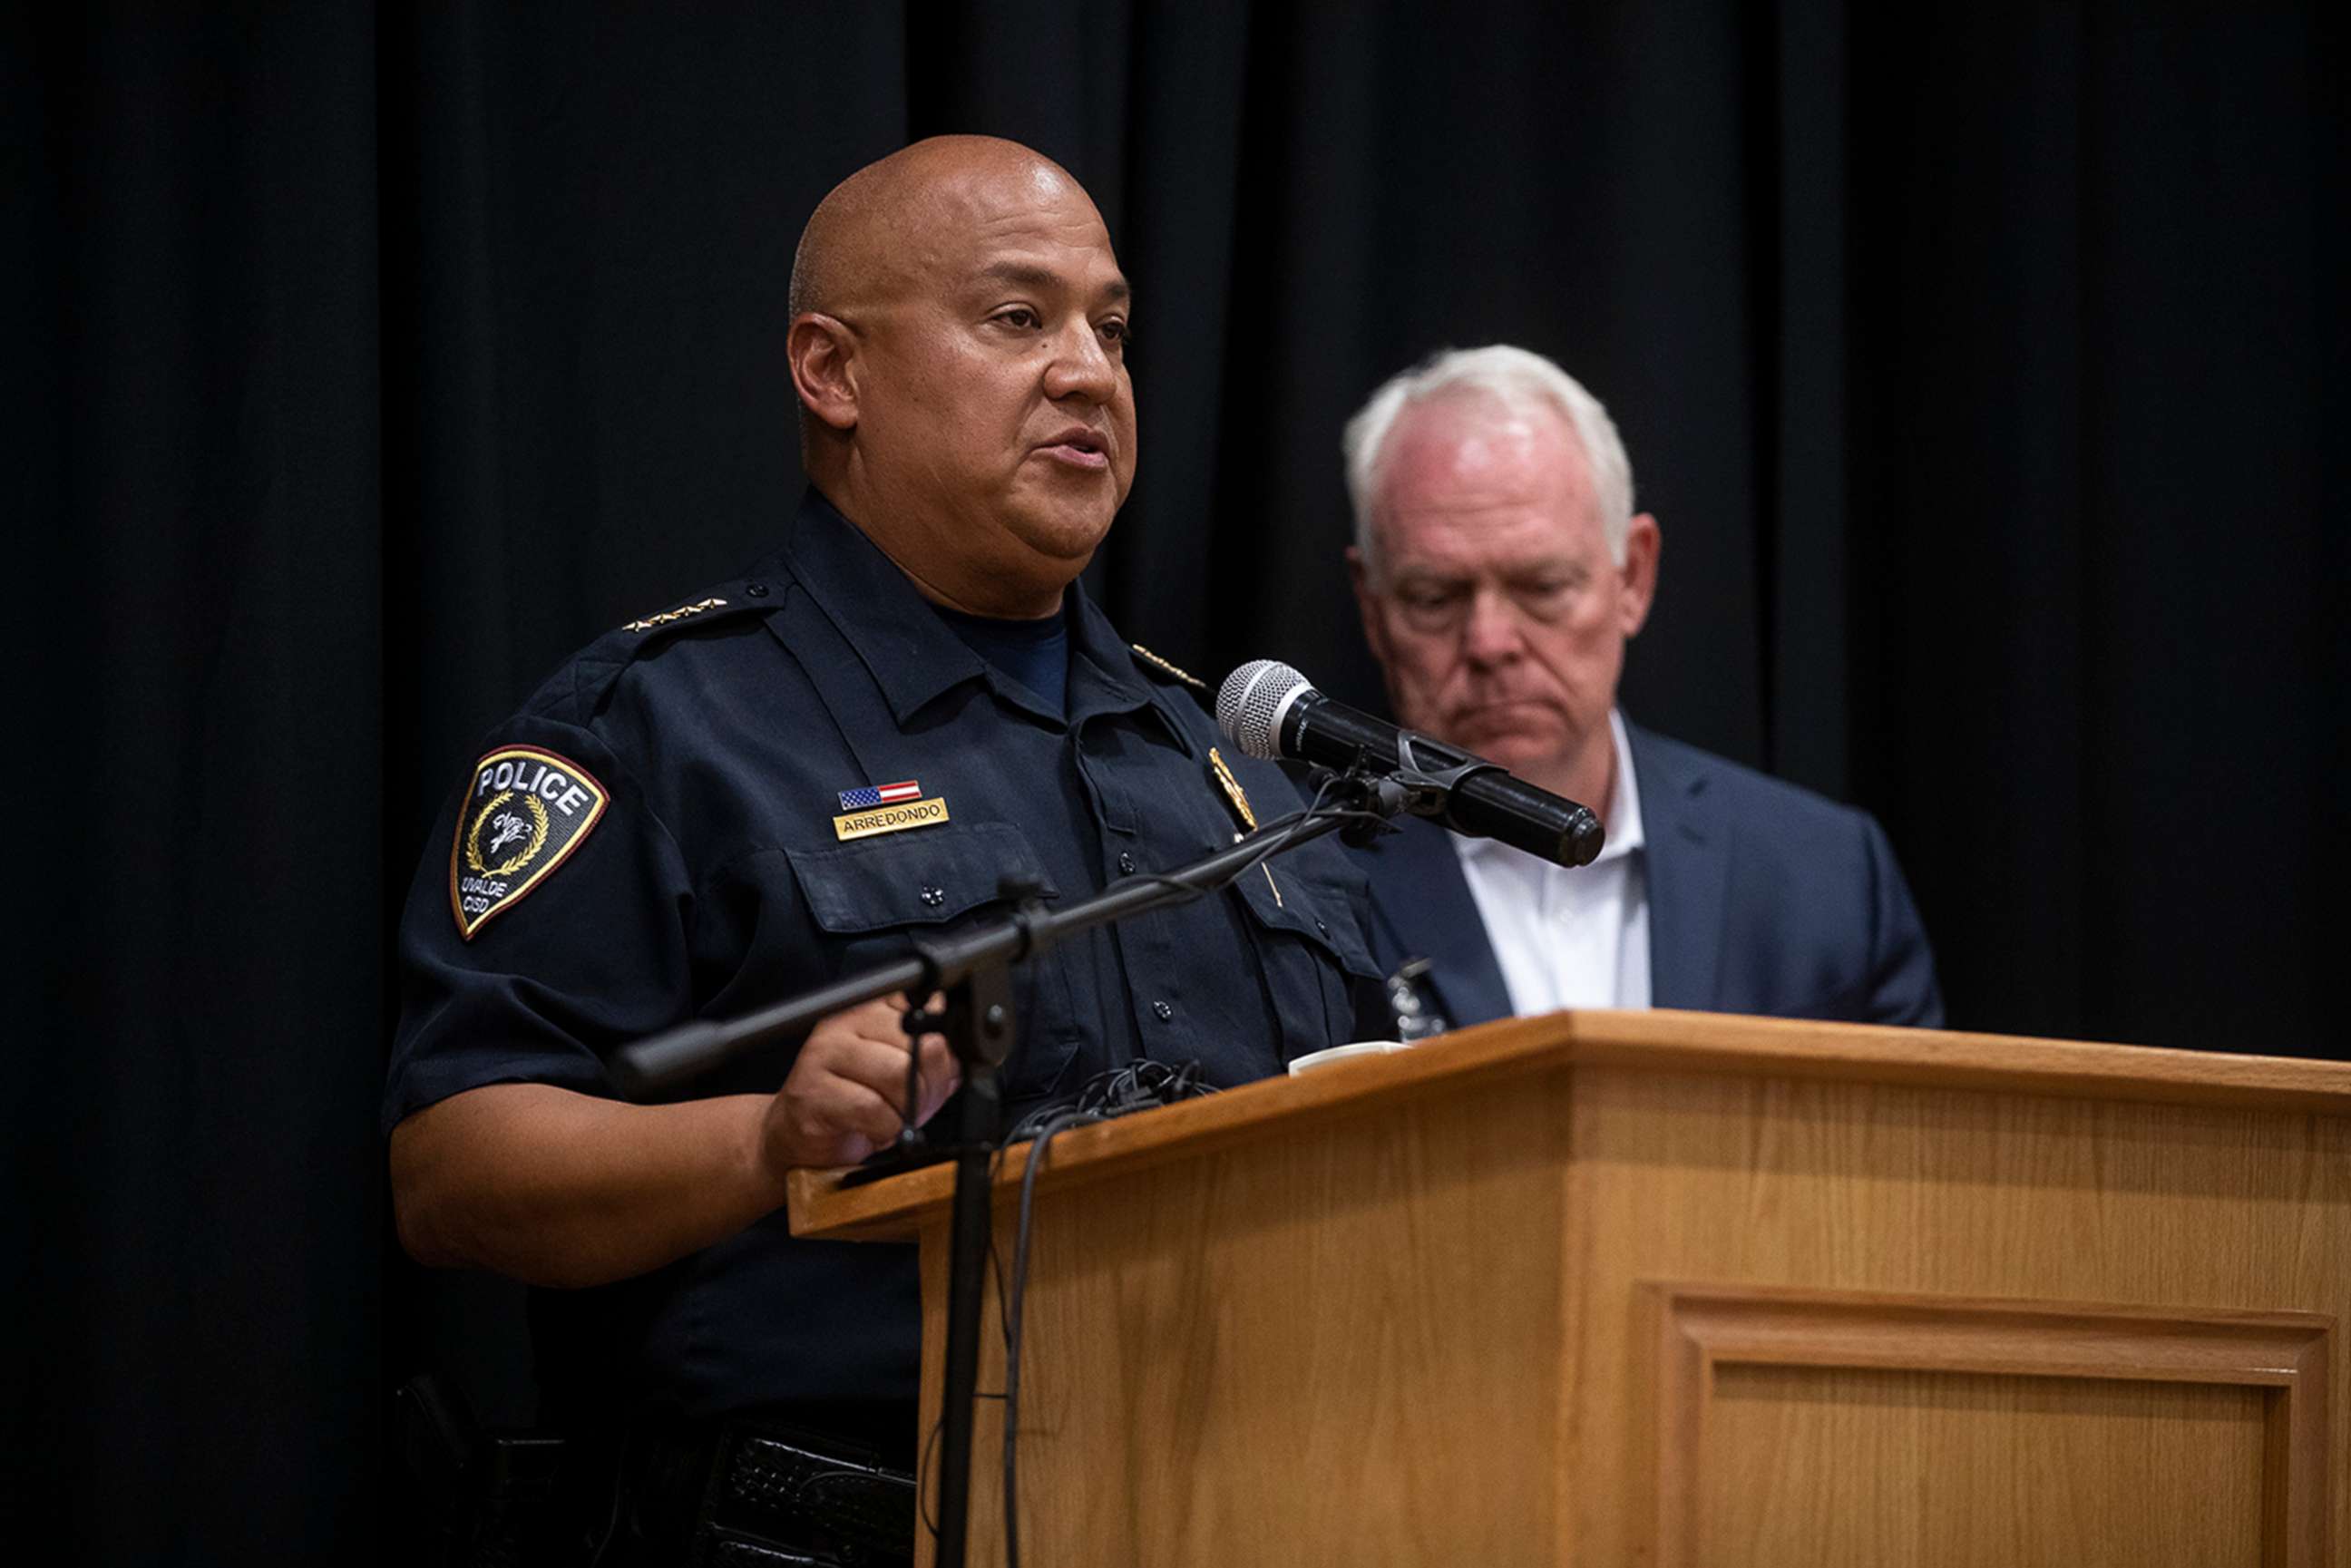 PHOTO: In this May 24, 2022 file photo Uvalde police chief Pete Arredondo speaks at a press conference following the shooting at Robb Elementary School in Uvalde, Texas.